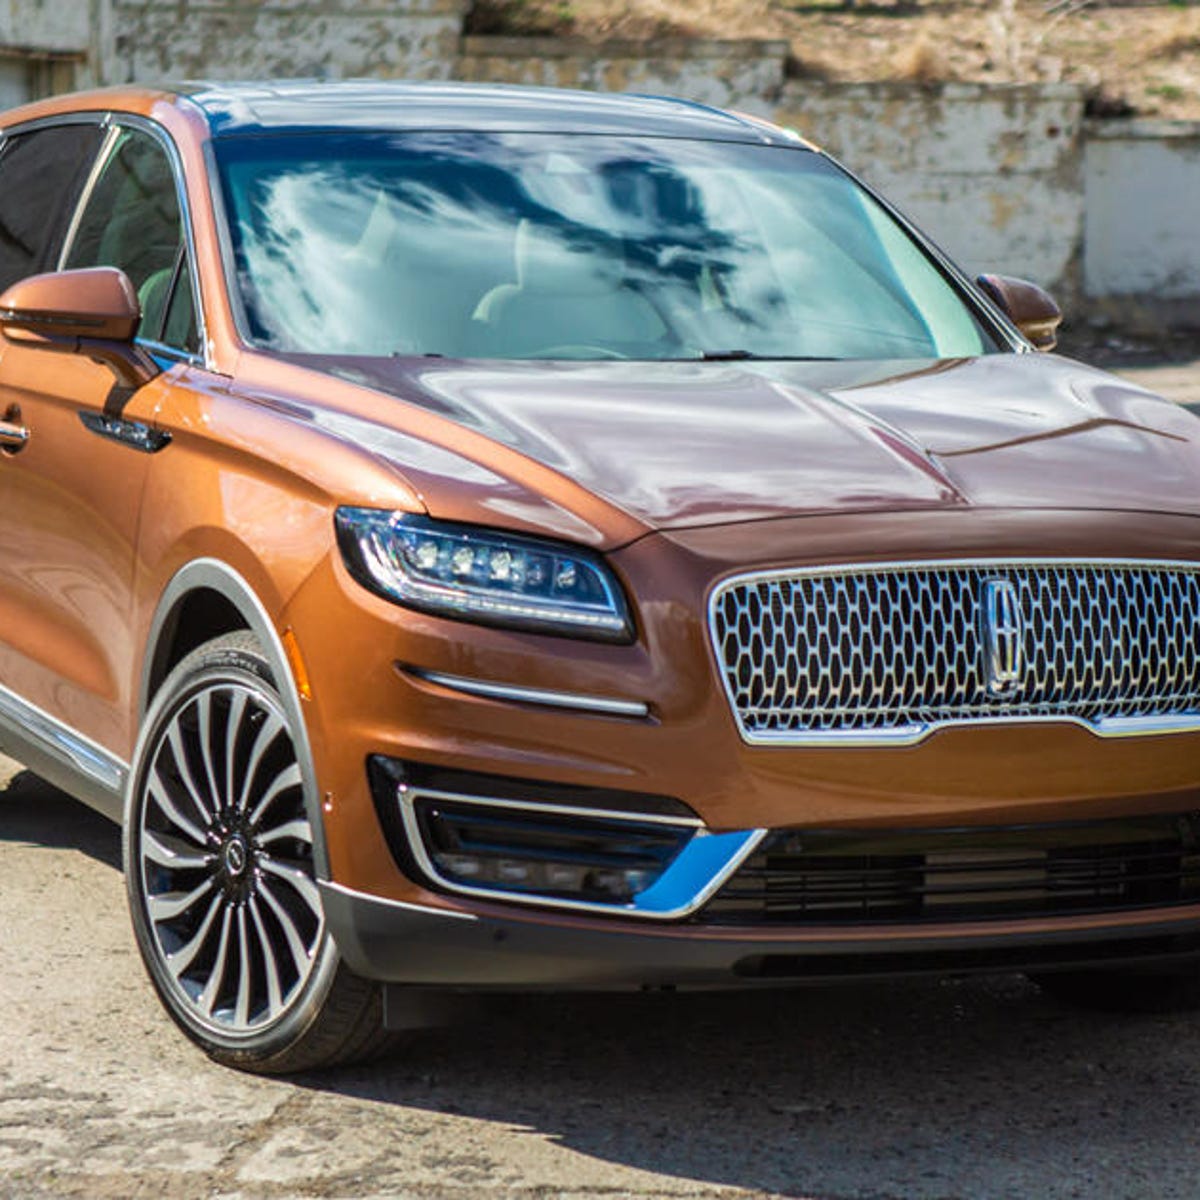 2019 Lincoln Nautilus review: A classy, comfy crossover - CNET